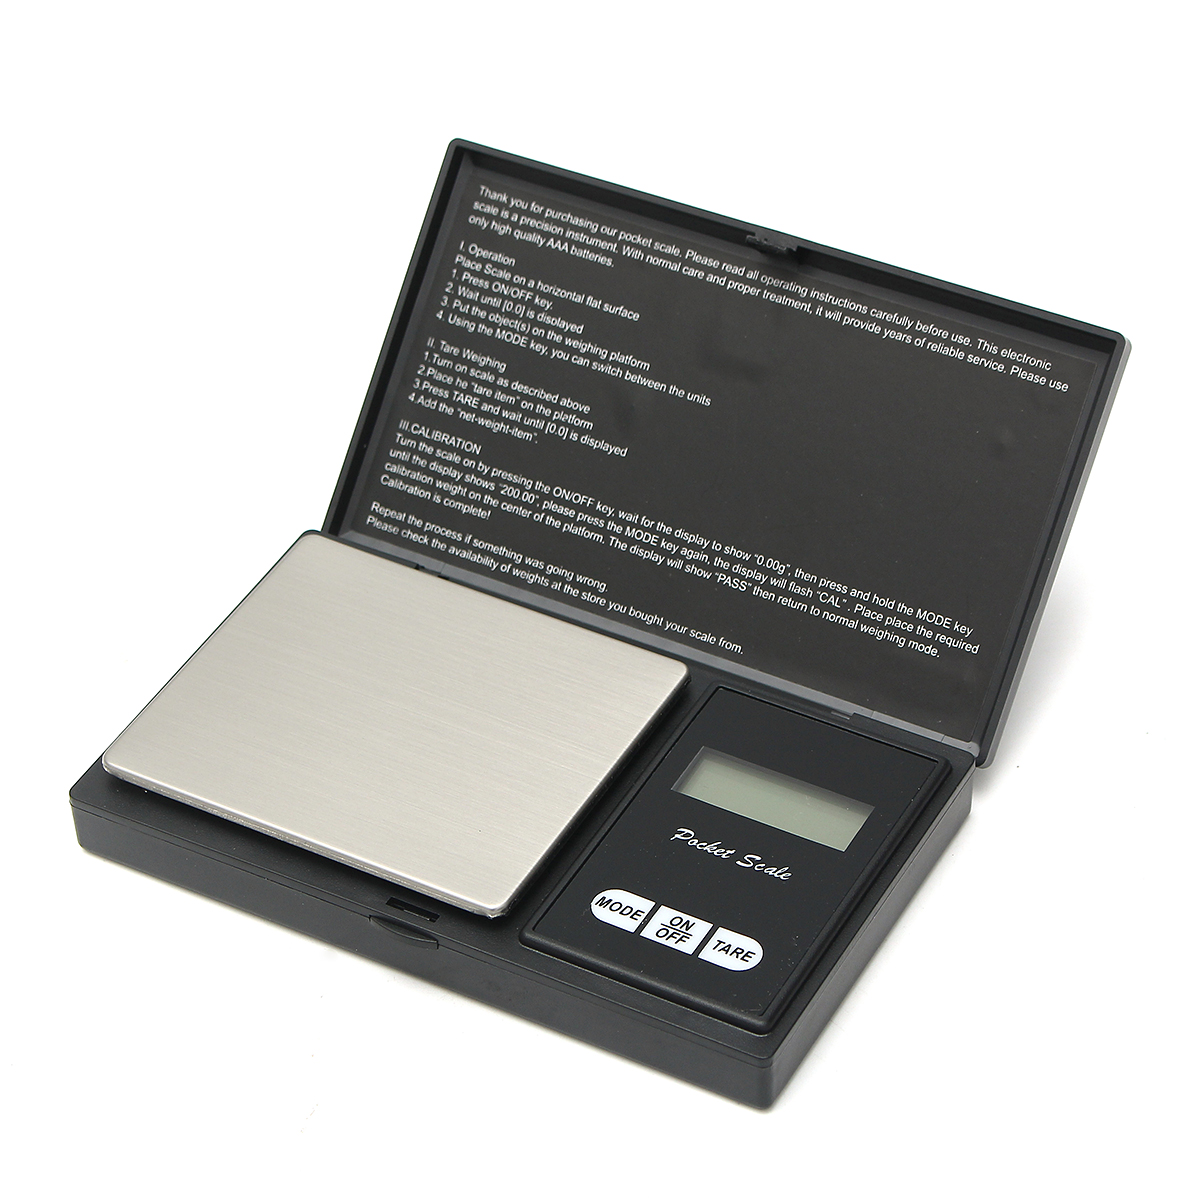 001g-500g-Electronic-Pocket-Mini-Digital-LCD-Gold-Weighing-Scale-Gram-1206787